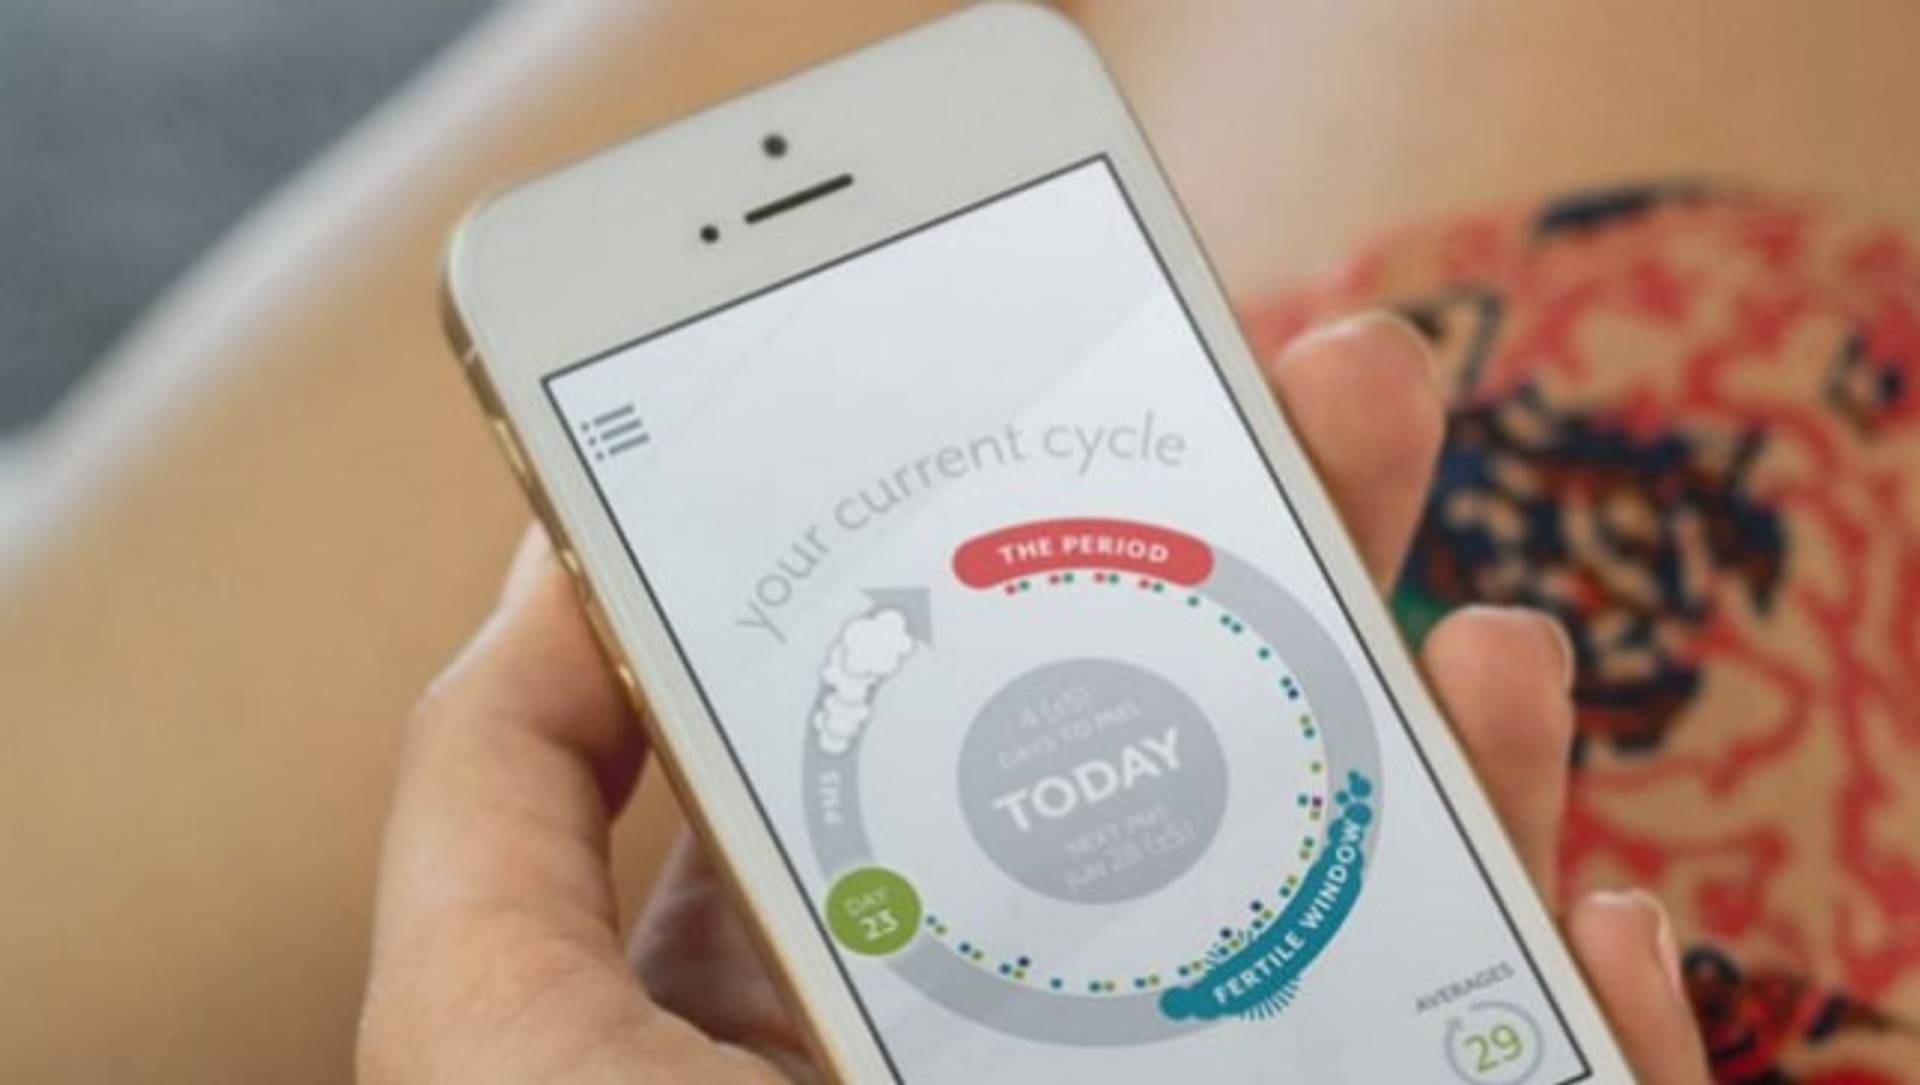 Birth control? There’s an app for that